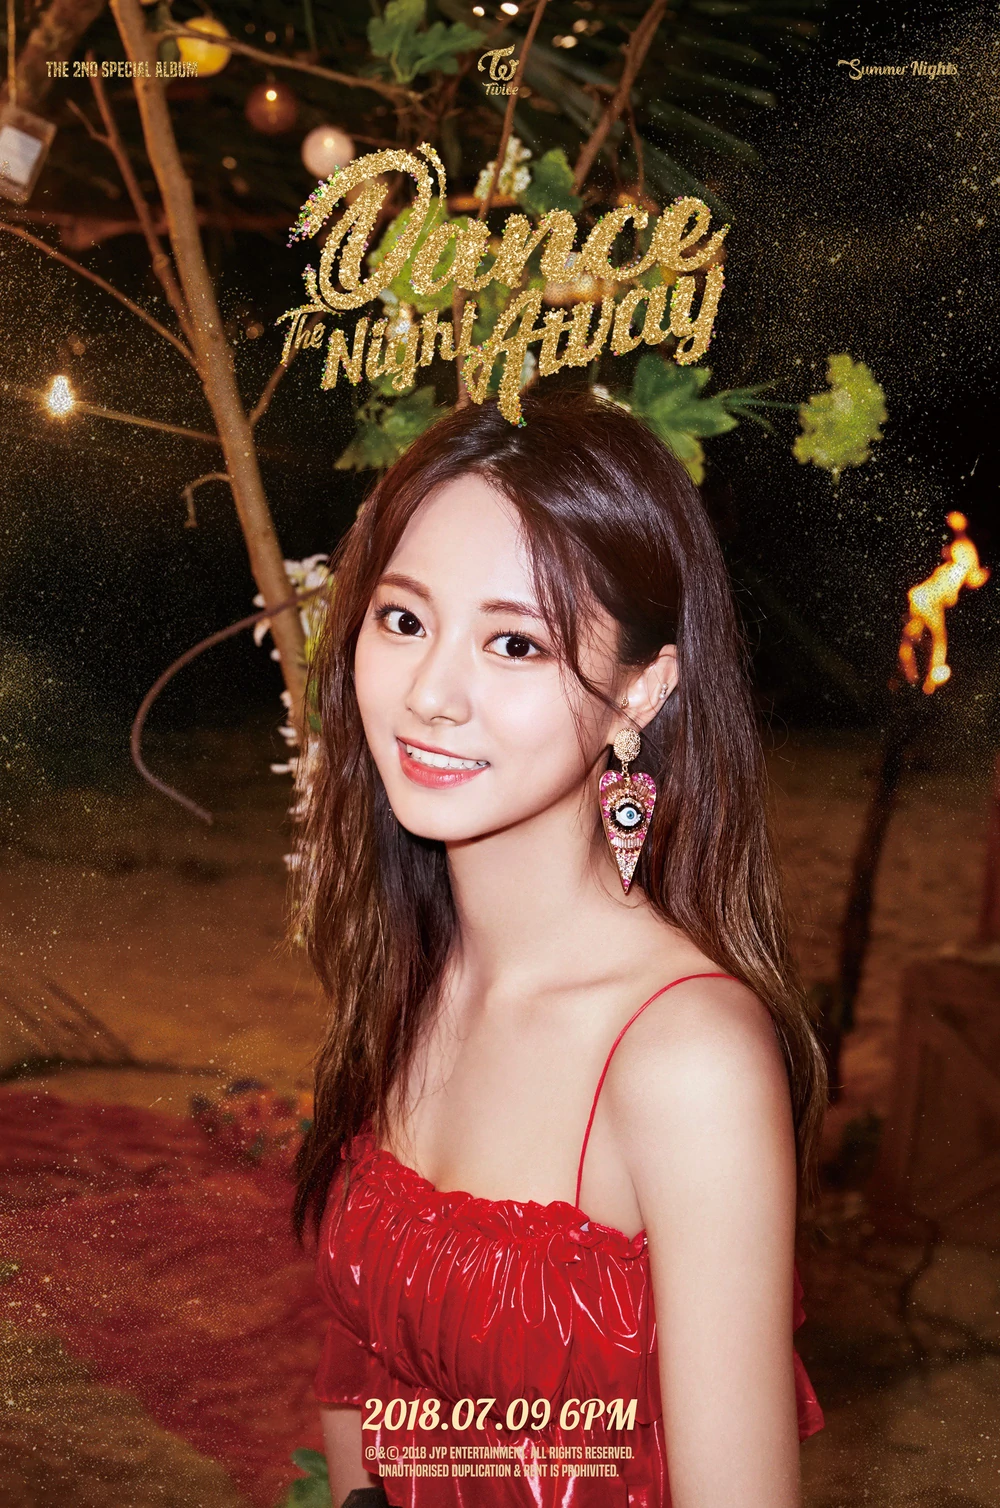 Twice Summer Nights Tzuyu Concept Teaser Picture Image Photo Kpop K-Concept 1